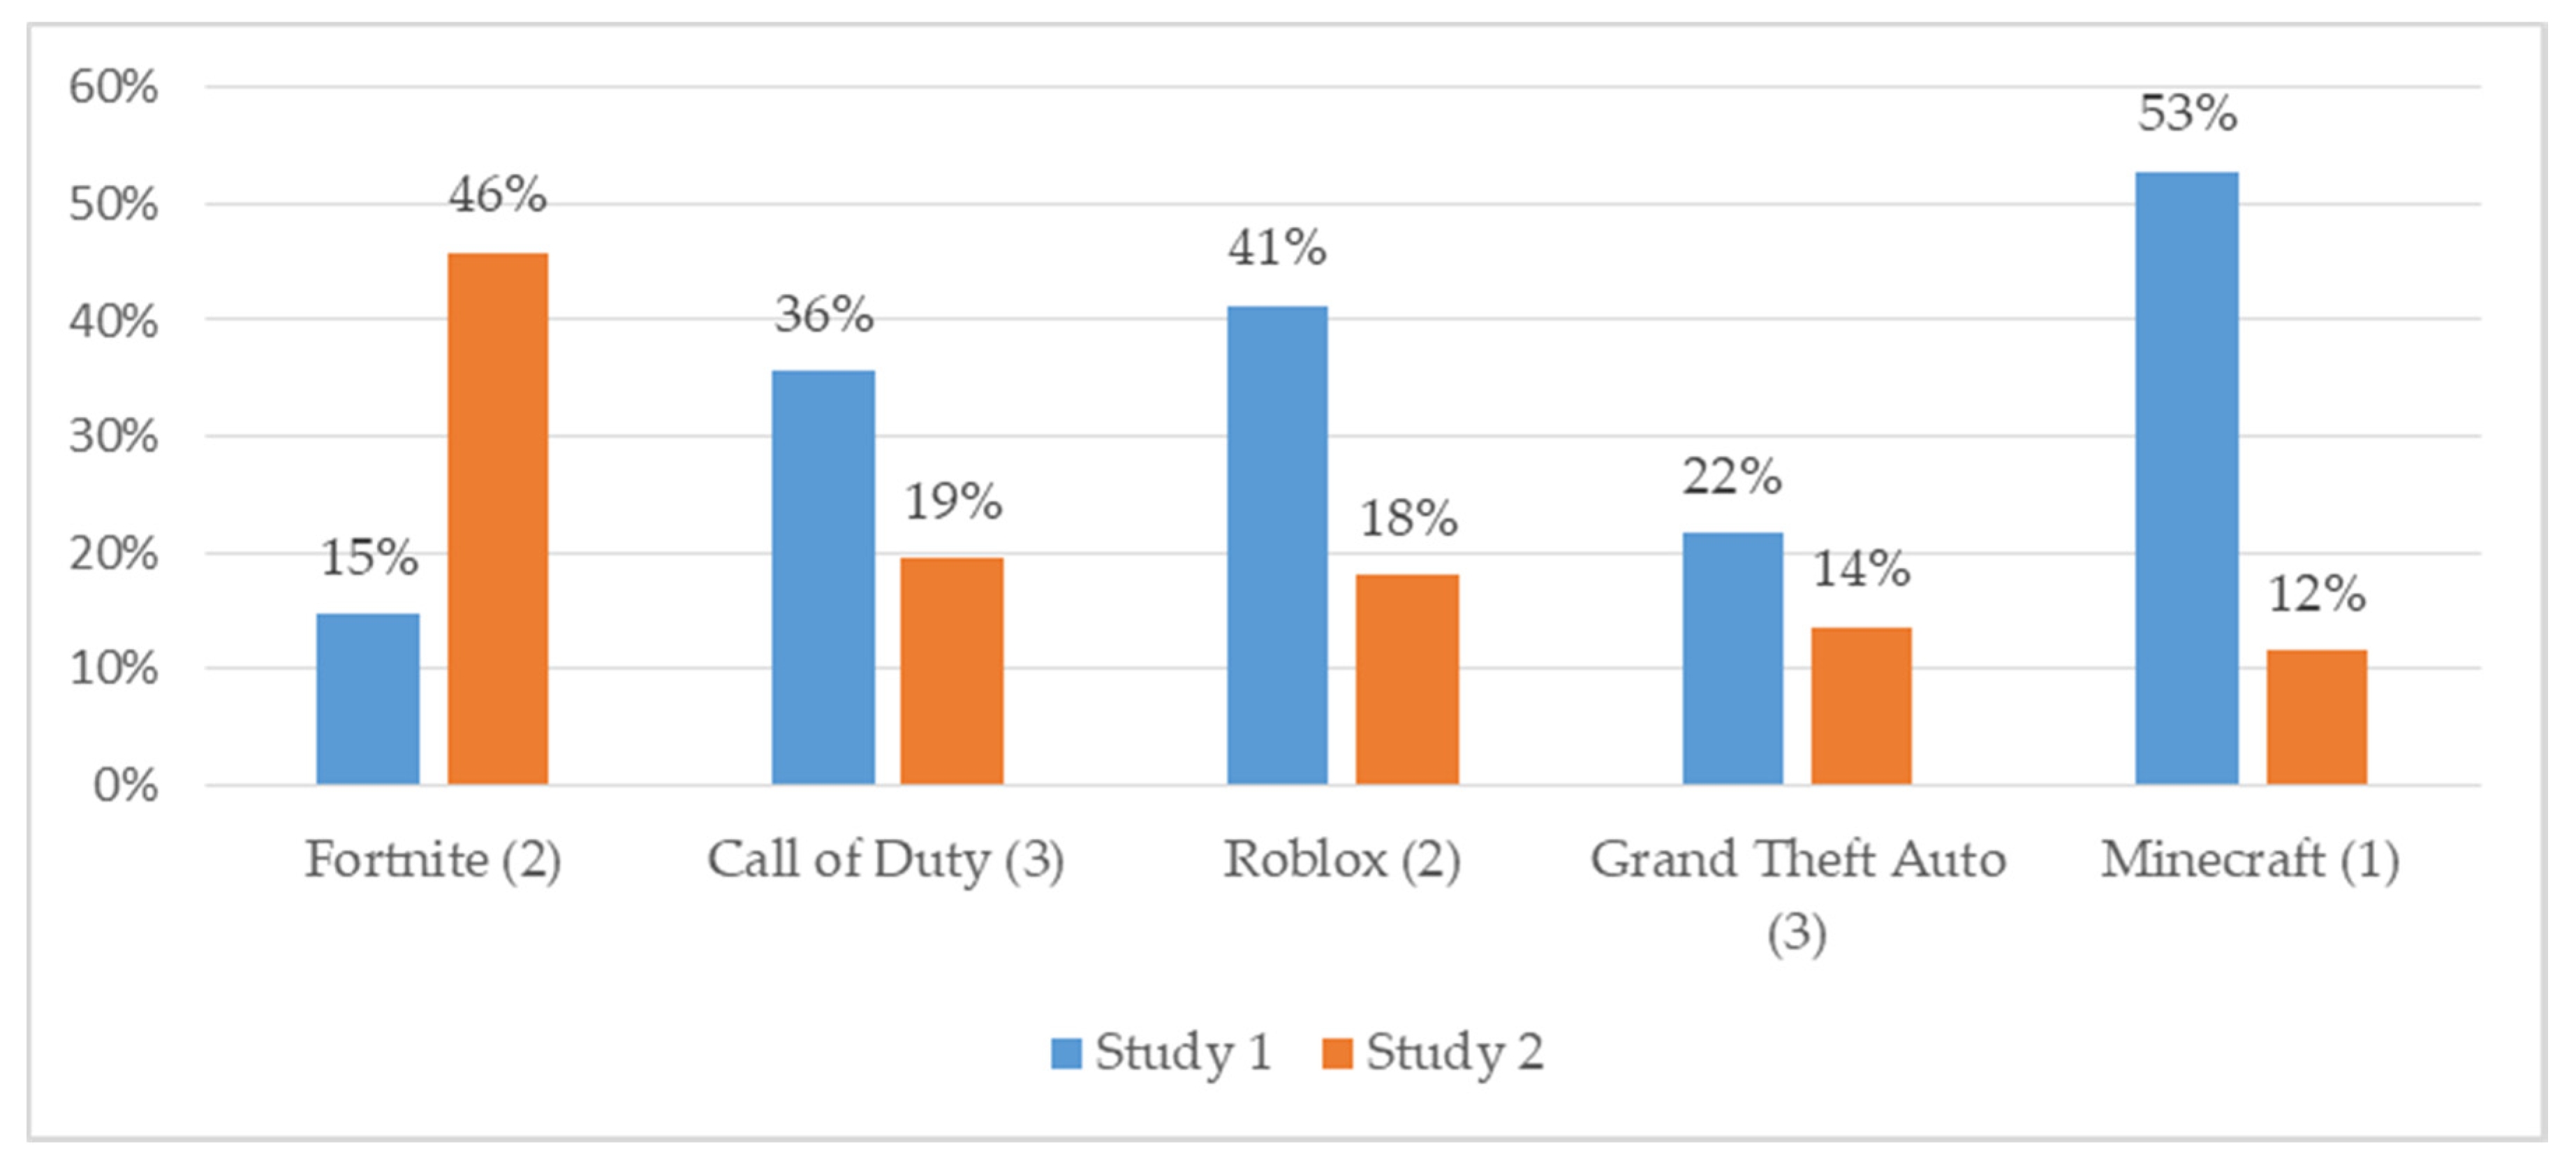 Ijerph Free Full Text Social And Behavioral Health Factors Associated With Violent And Mature Gaming In Early Adolescence Html - roblox survey says 60 of teens dont report inappropriate